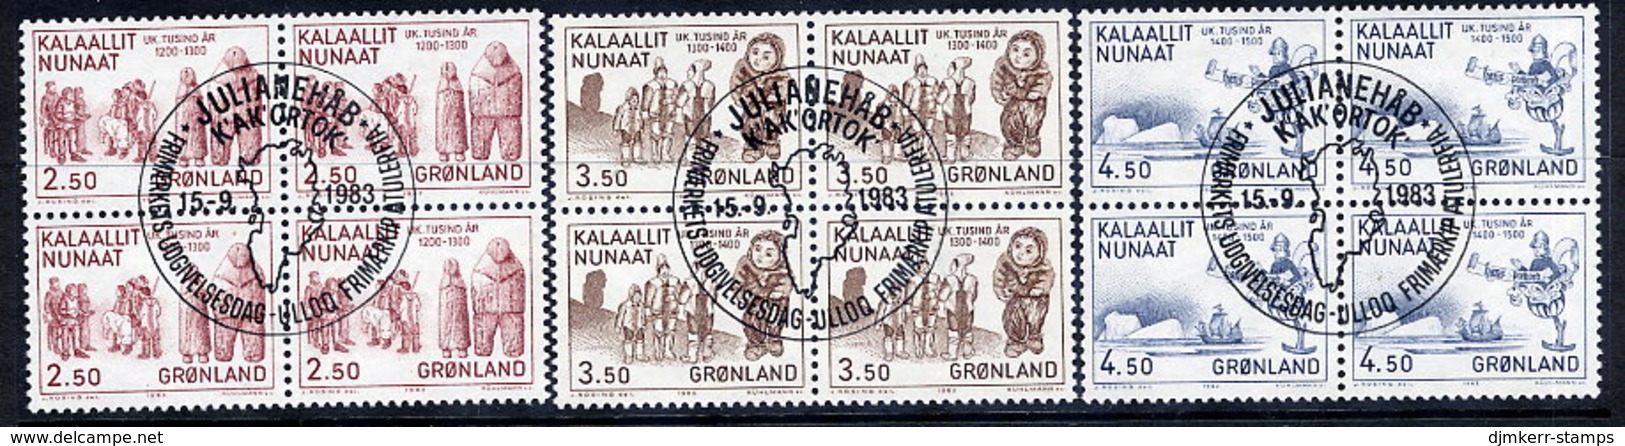 GREENLAND 1983 Millenary Of Settlement In Used  Blocks Of 4.  Michel 143-45 - Gebraucht